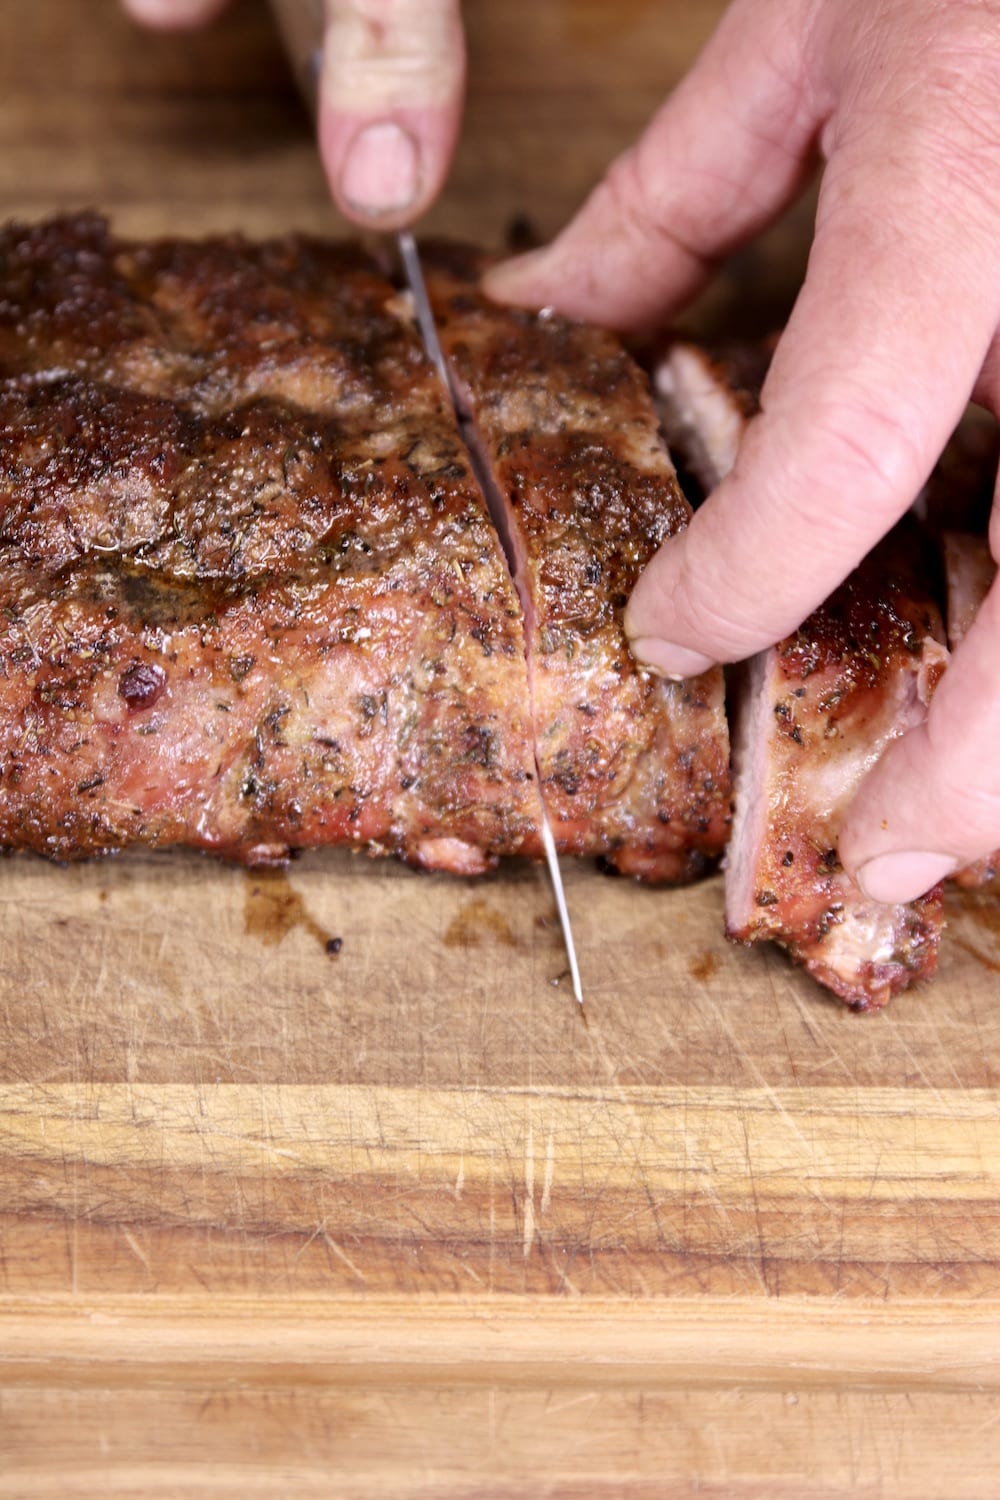 Slicing baby back ribs on a cutting board